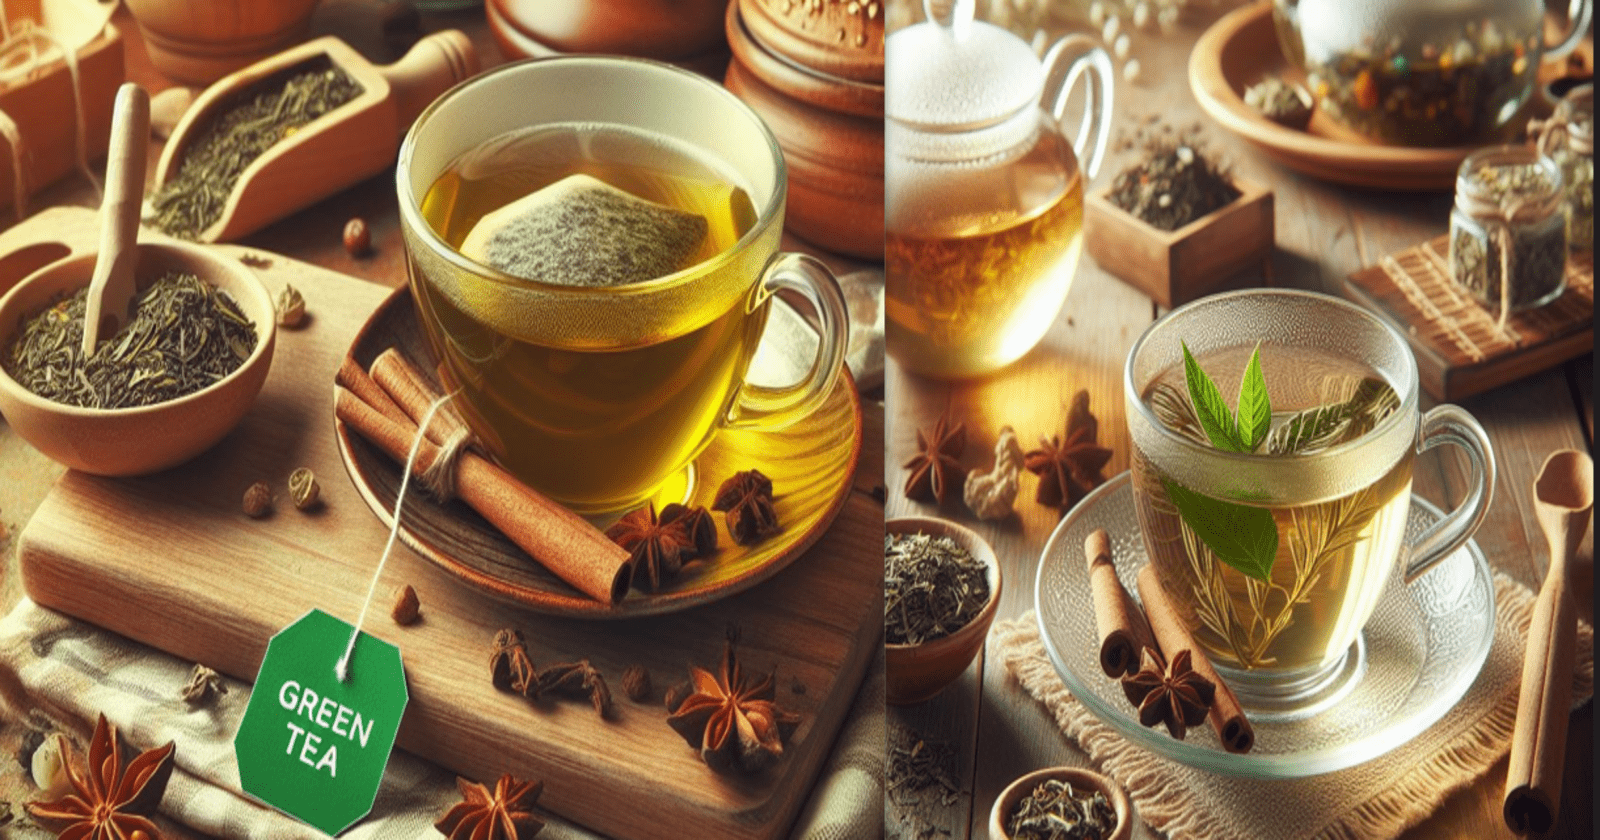 Green tea vs Herbal tea: types, benefits, medication interactions, which one is best for you